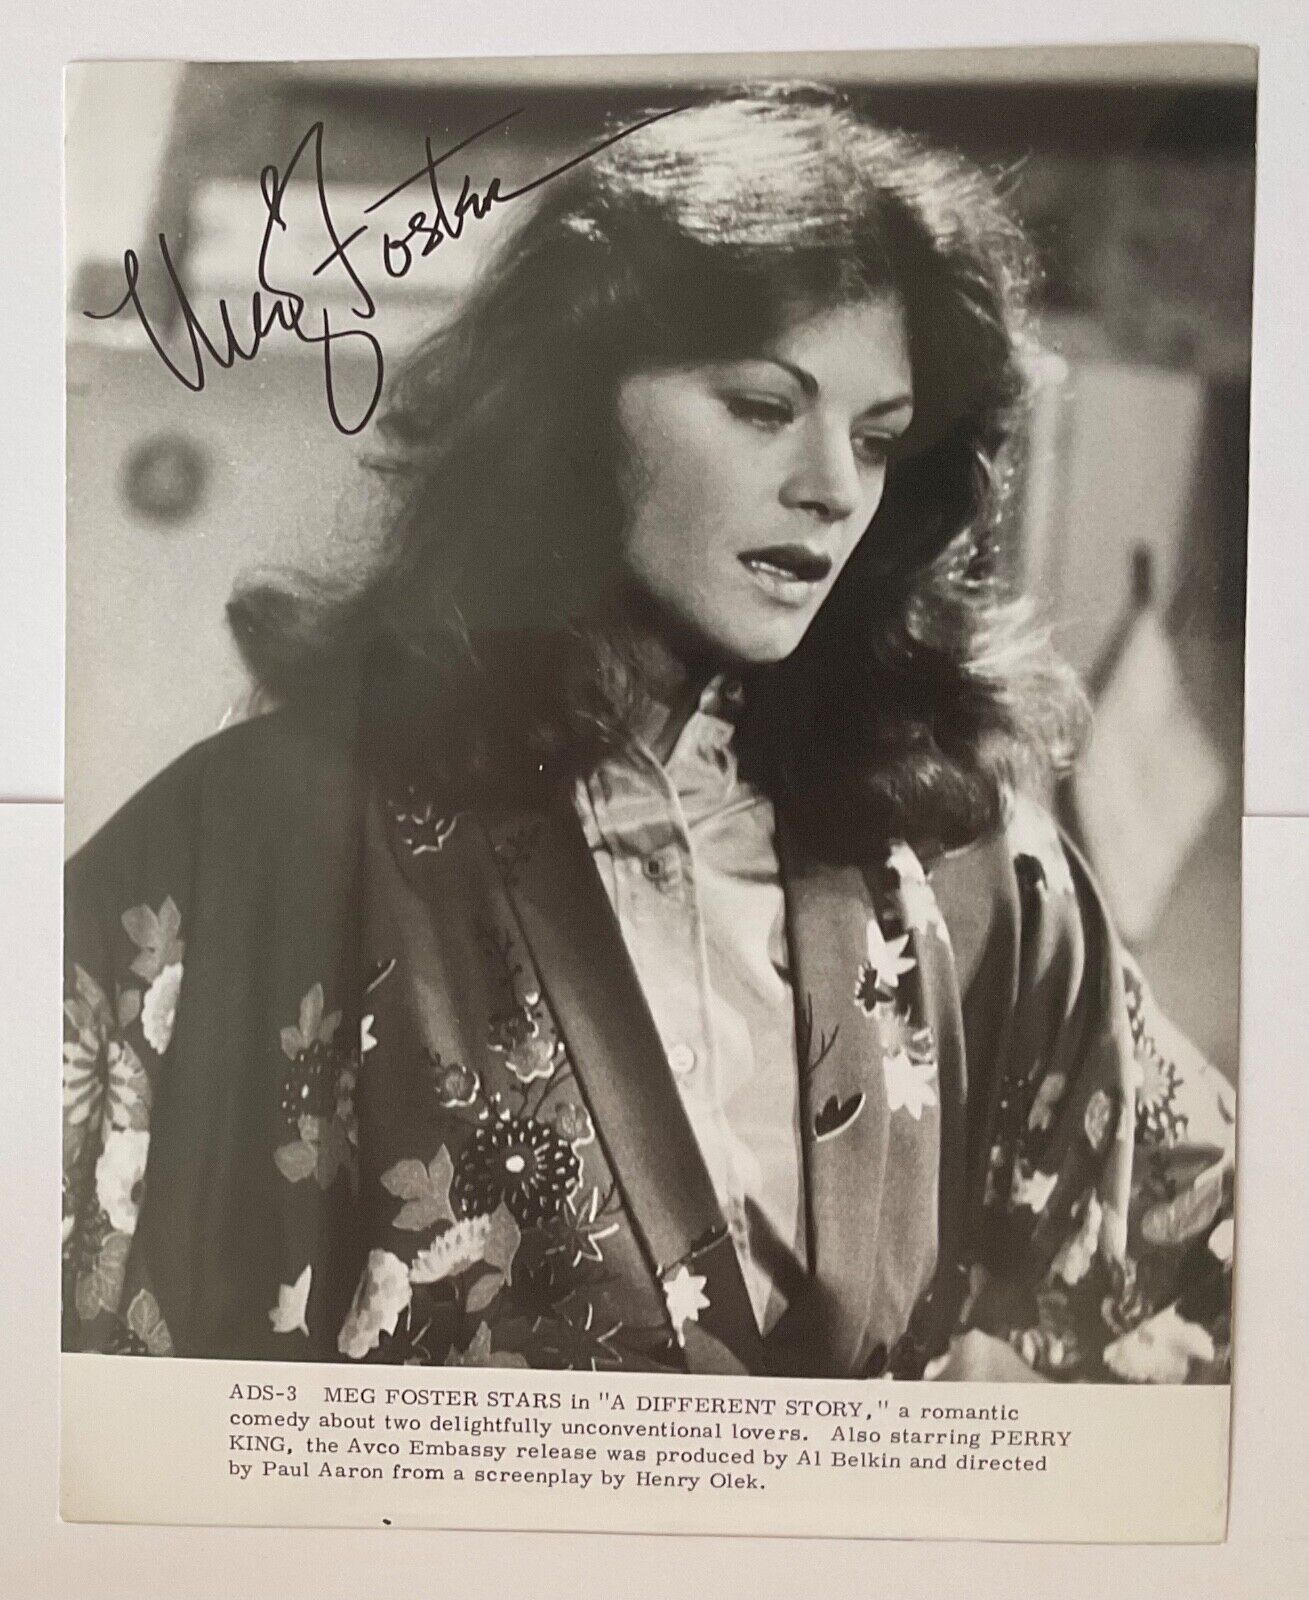 MEG FOSTER ( A Different Story ) Genuine Handsigned Photograph 10 x 8